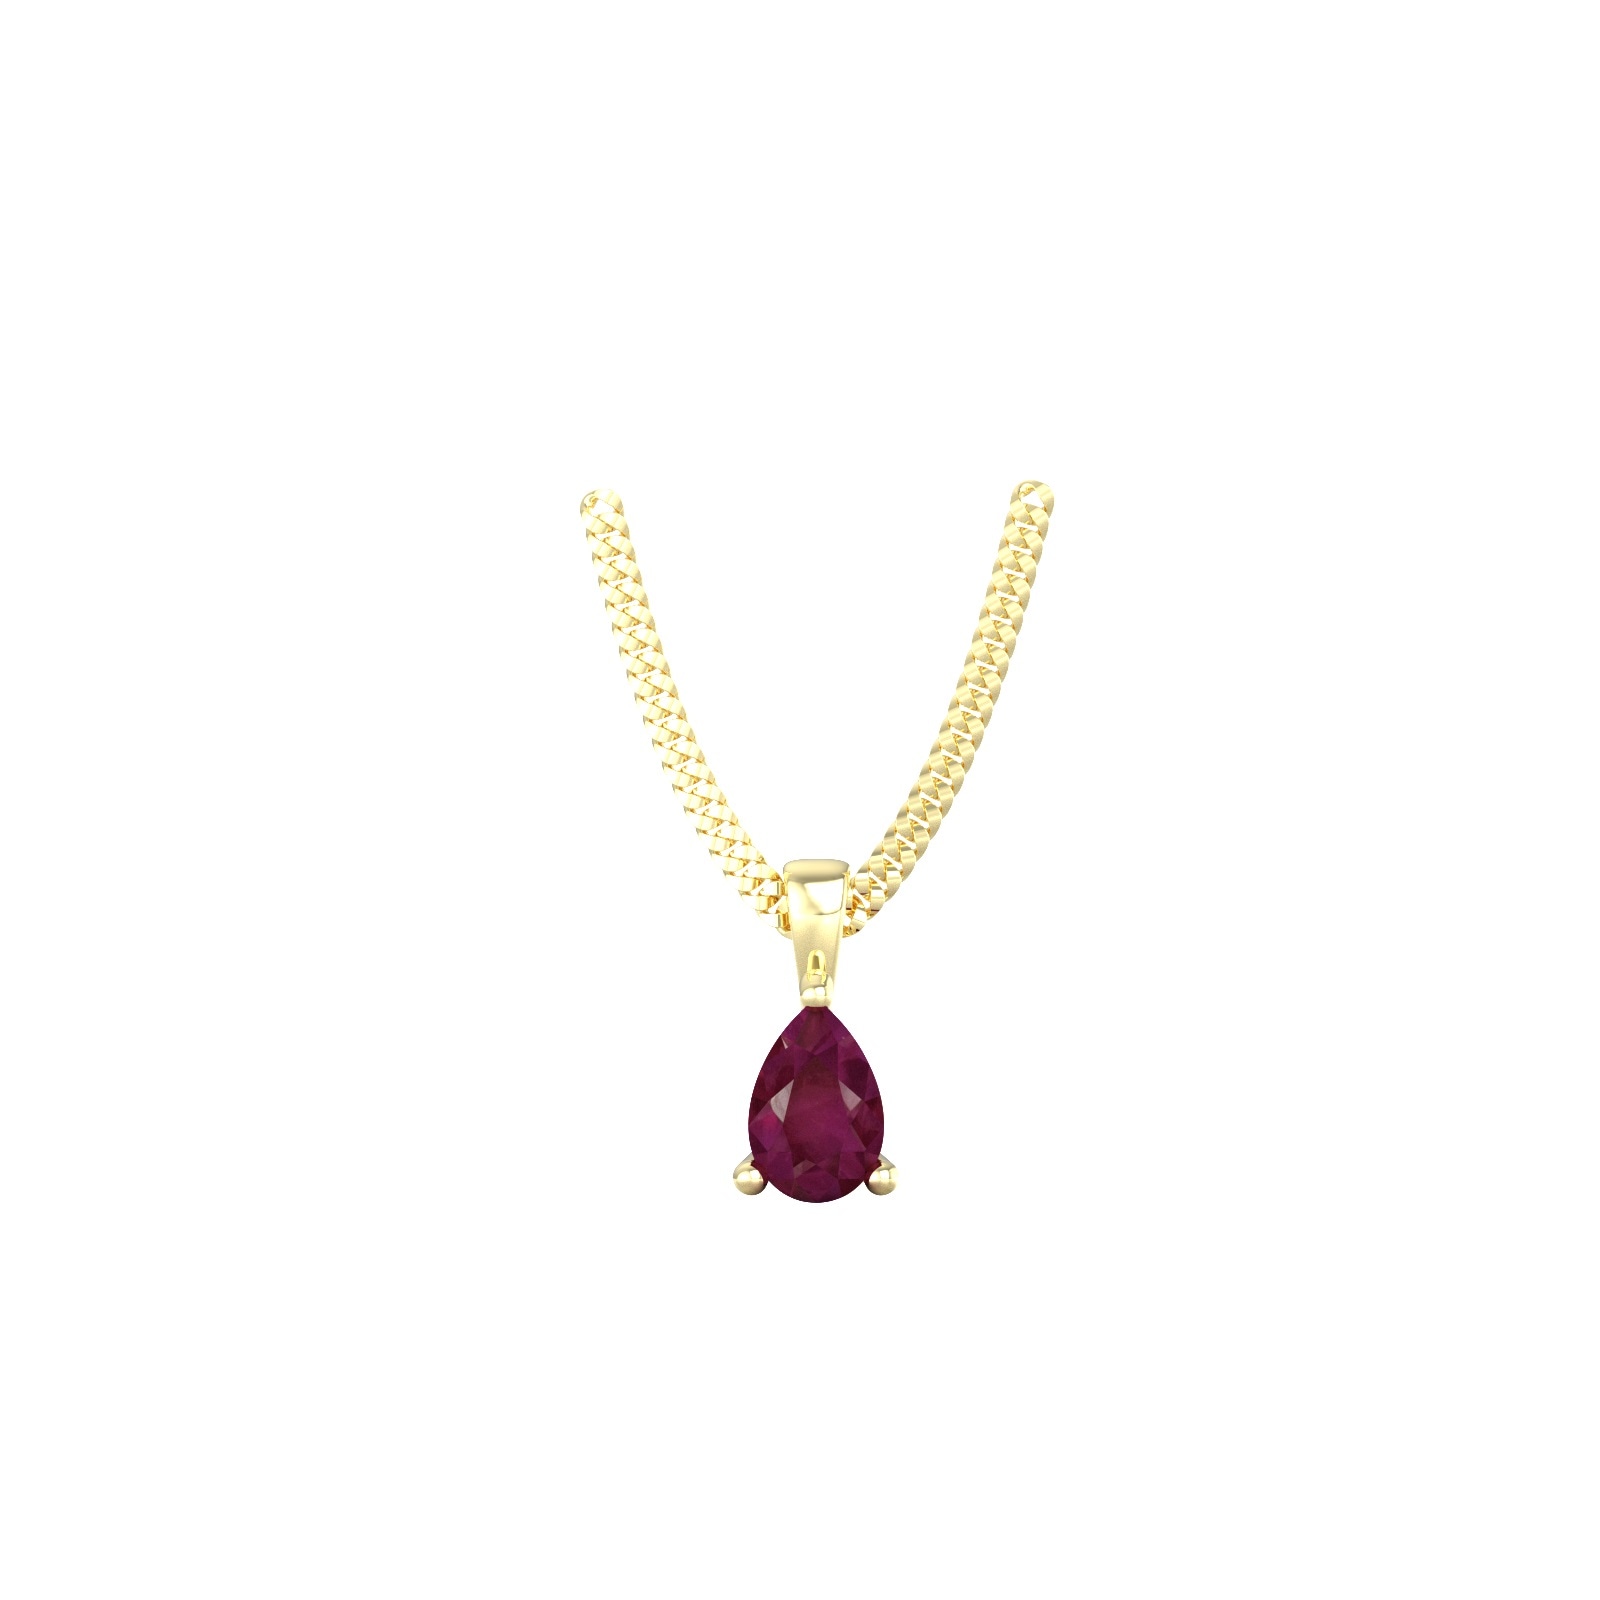 Radiant Ruby Blooms Pendant